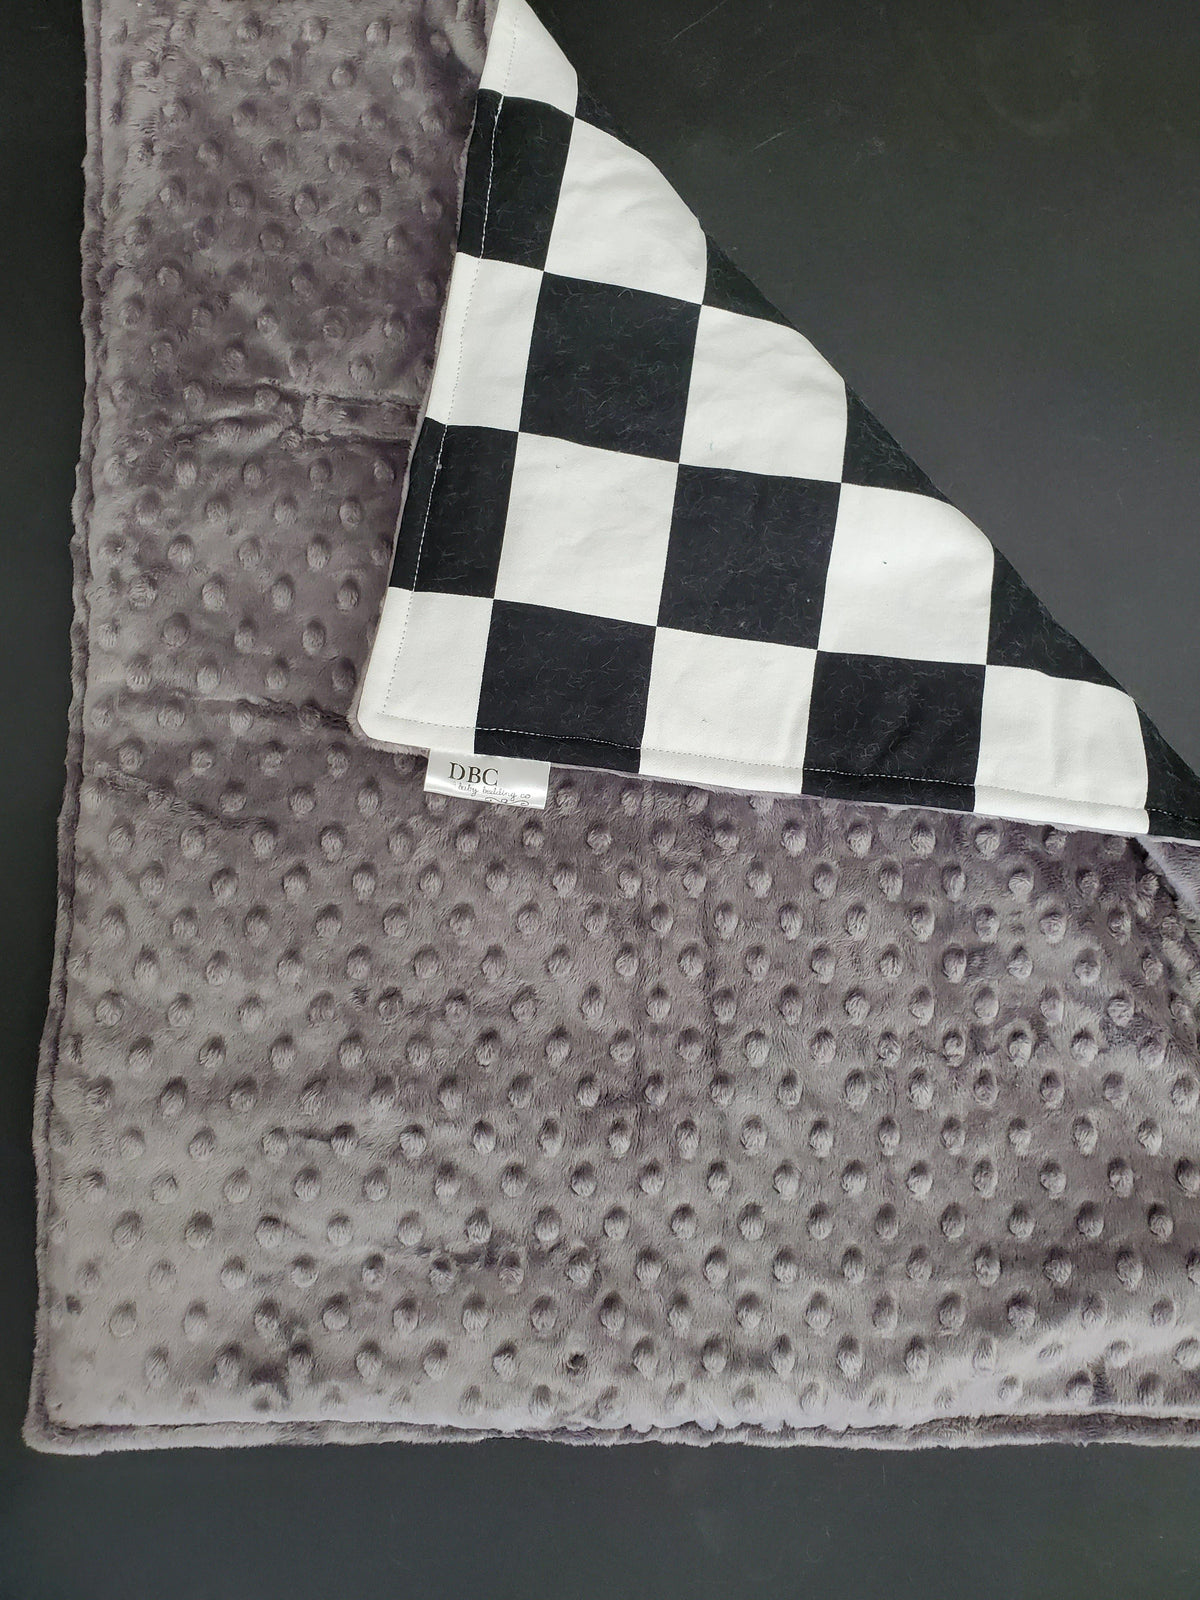 On the Go Changing Pad- Race Flag Check with gray minky interior - DBC Baby Bedding Co 